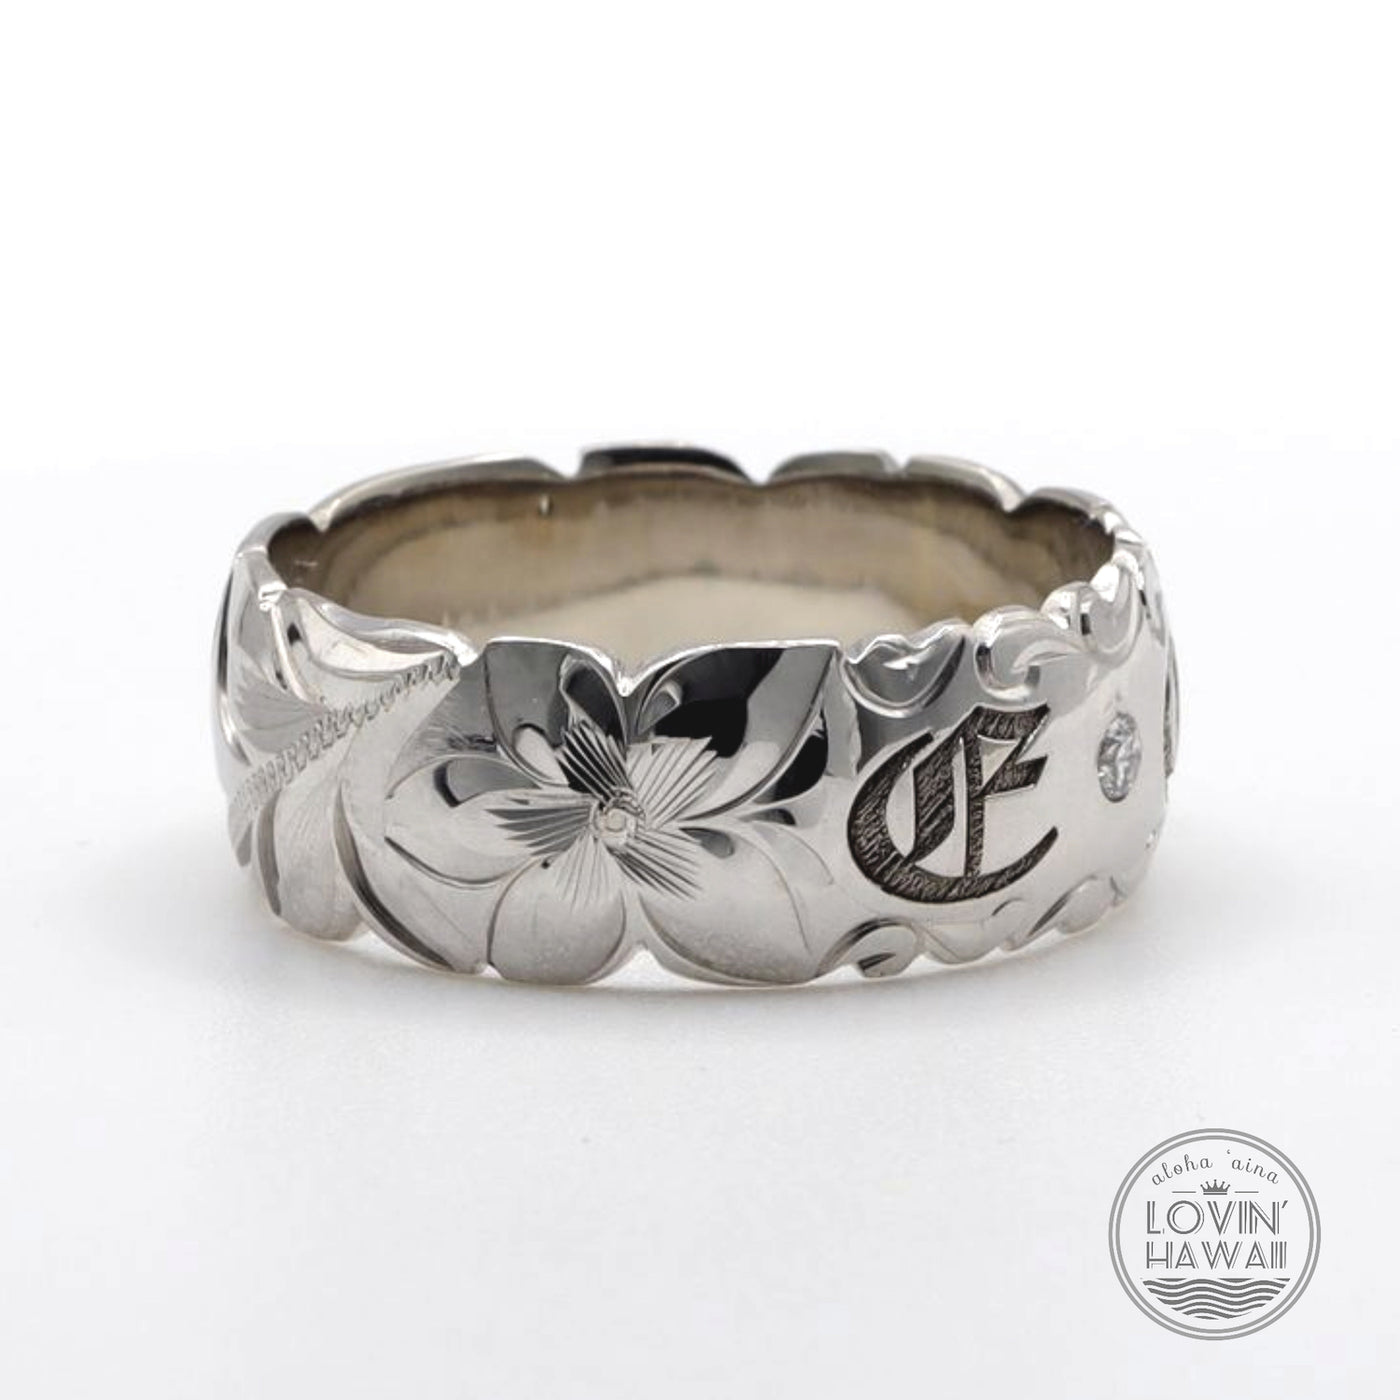 Personalized Hawaii ring